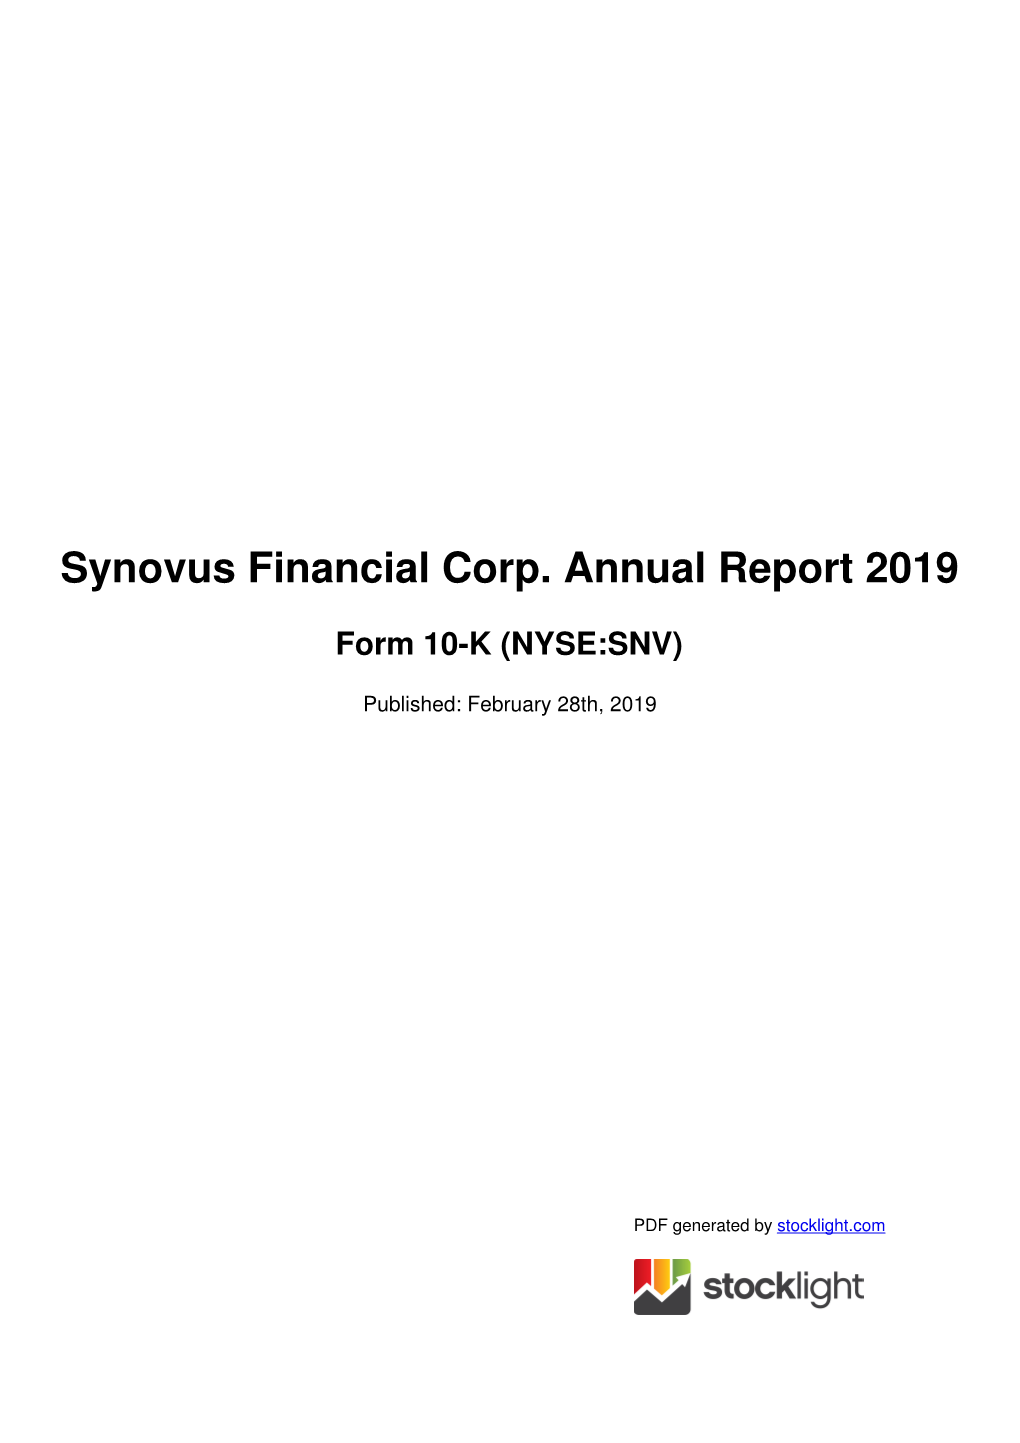 Synovus Financial Corp. Annual Report 2019